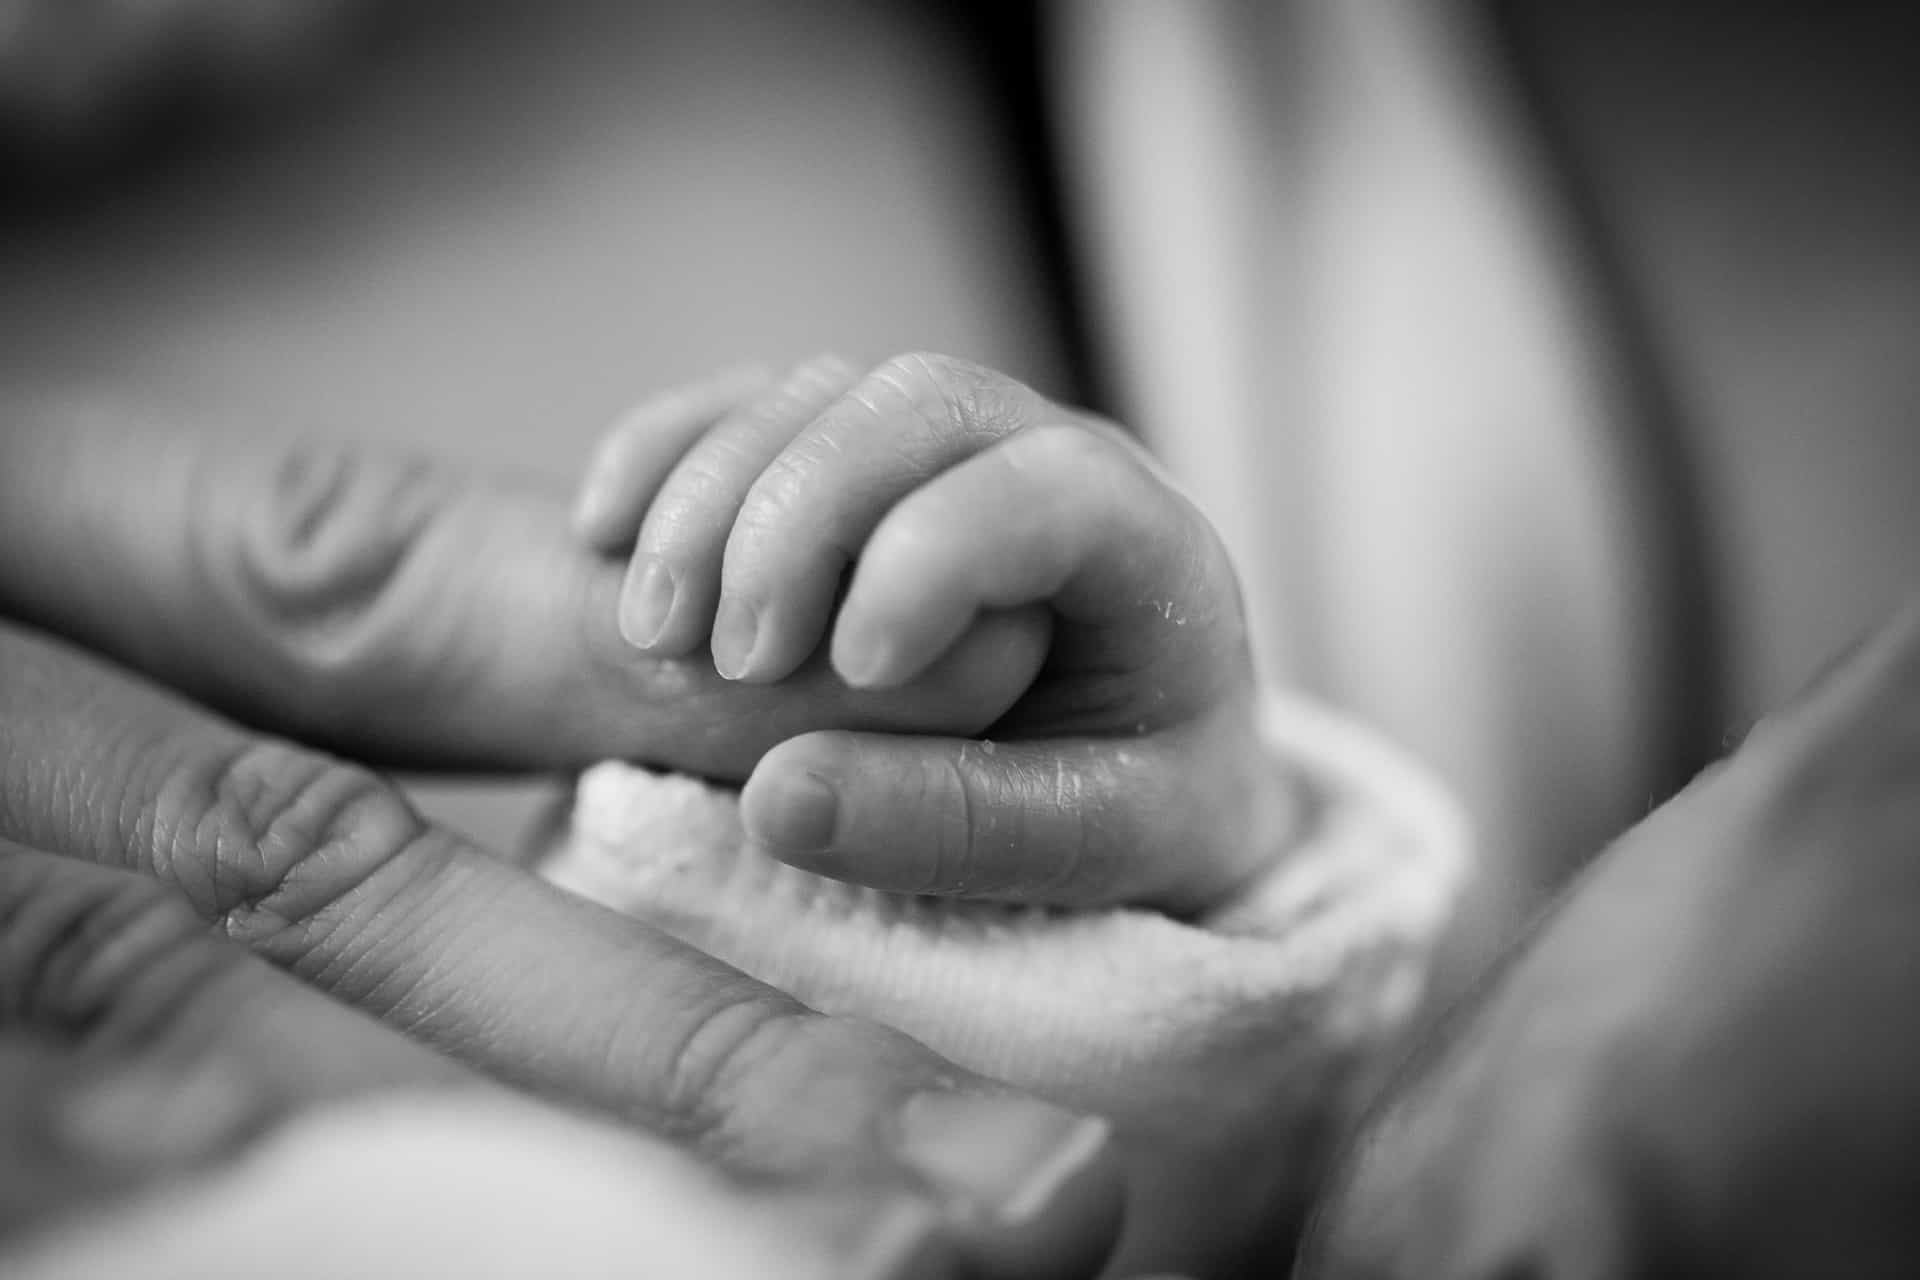 A mother holding a newborn baby's hand.